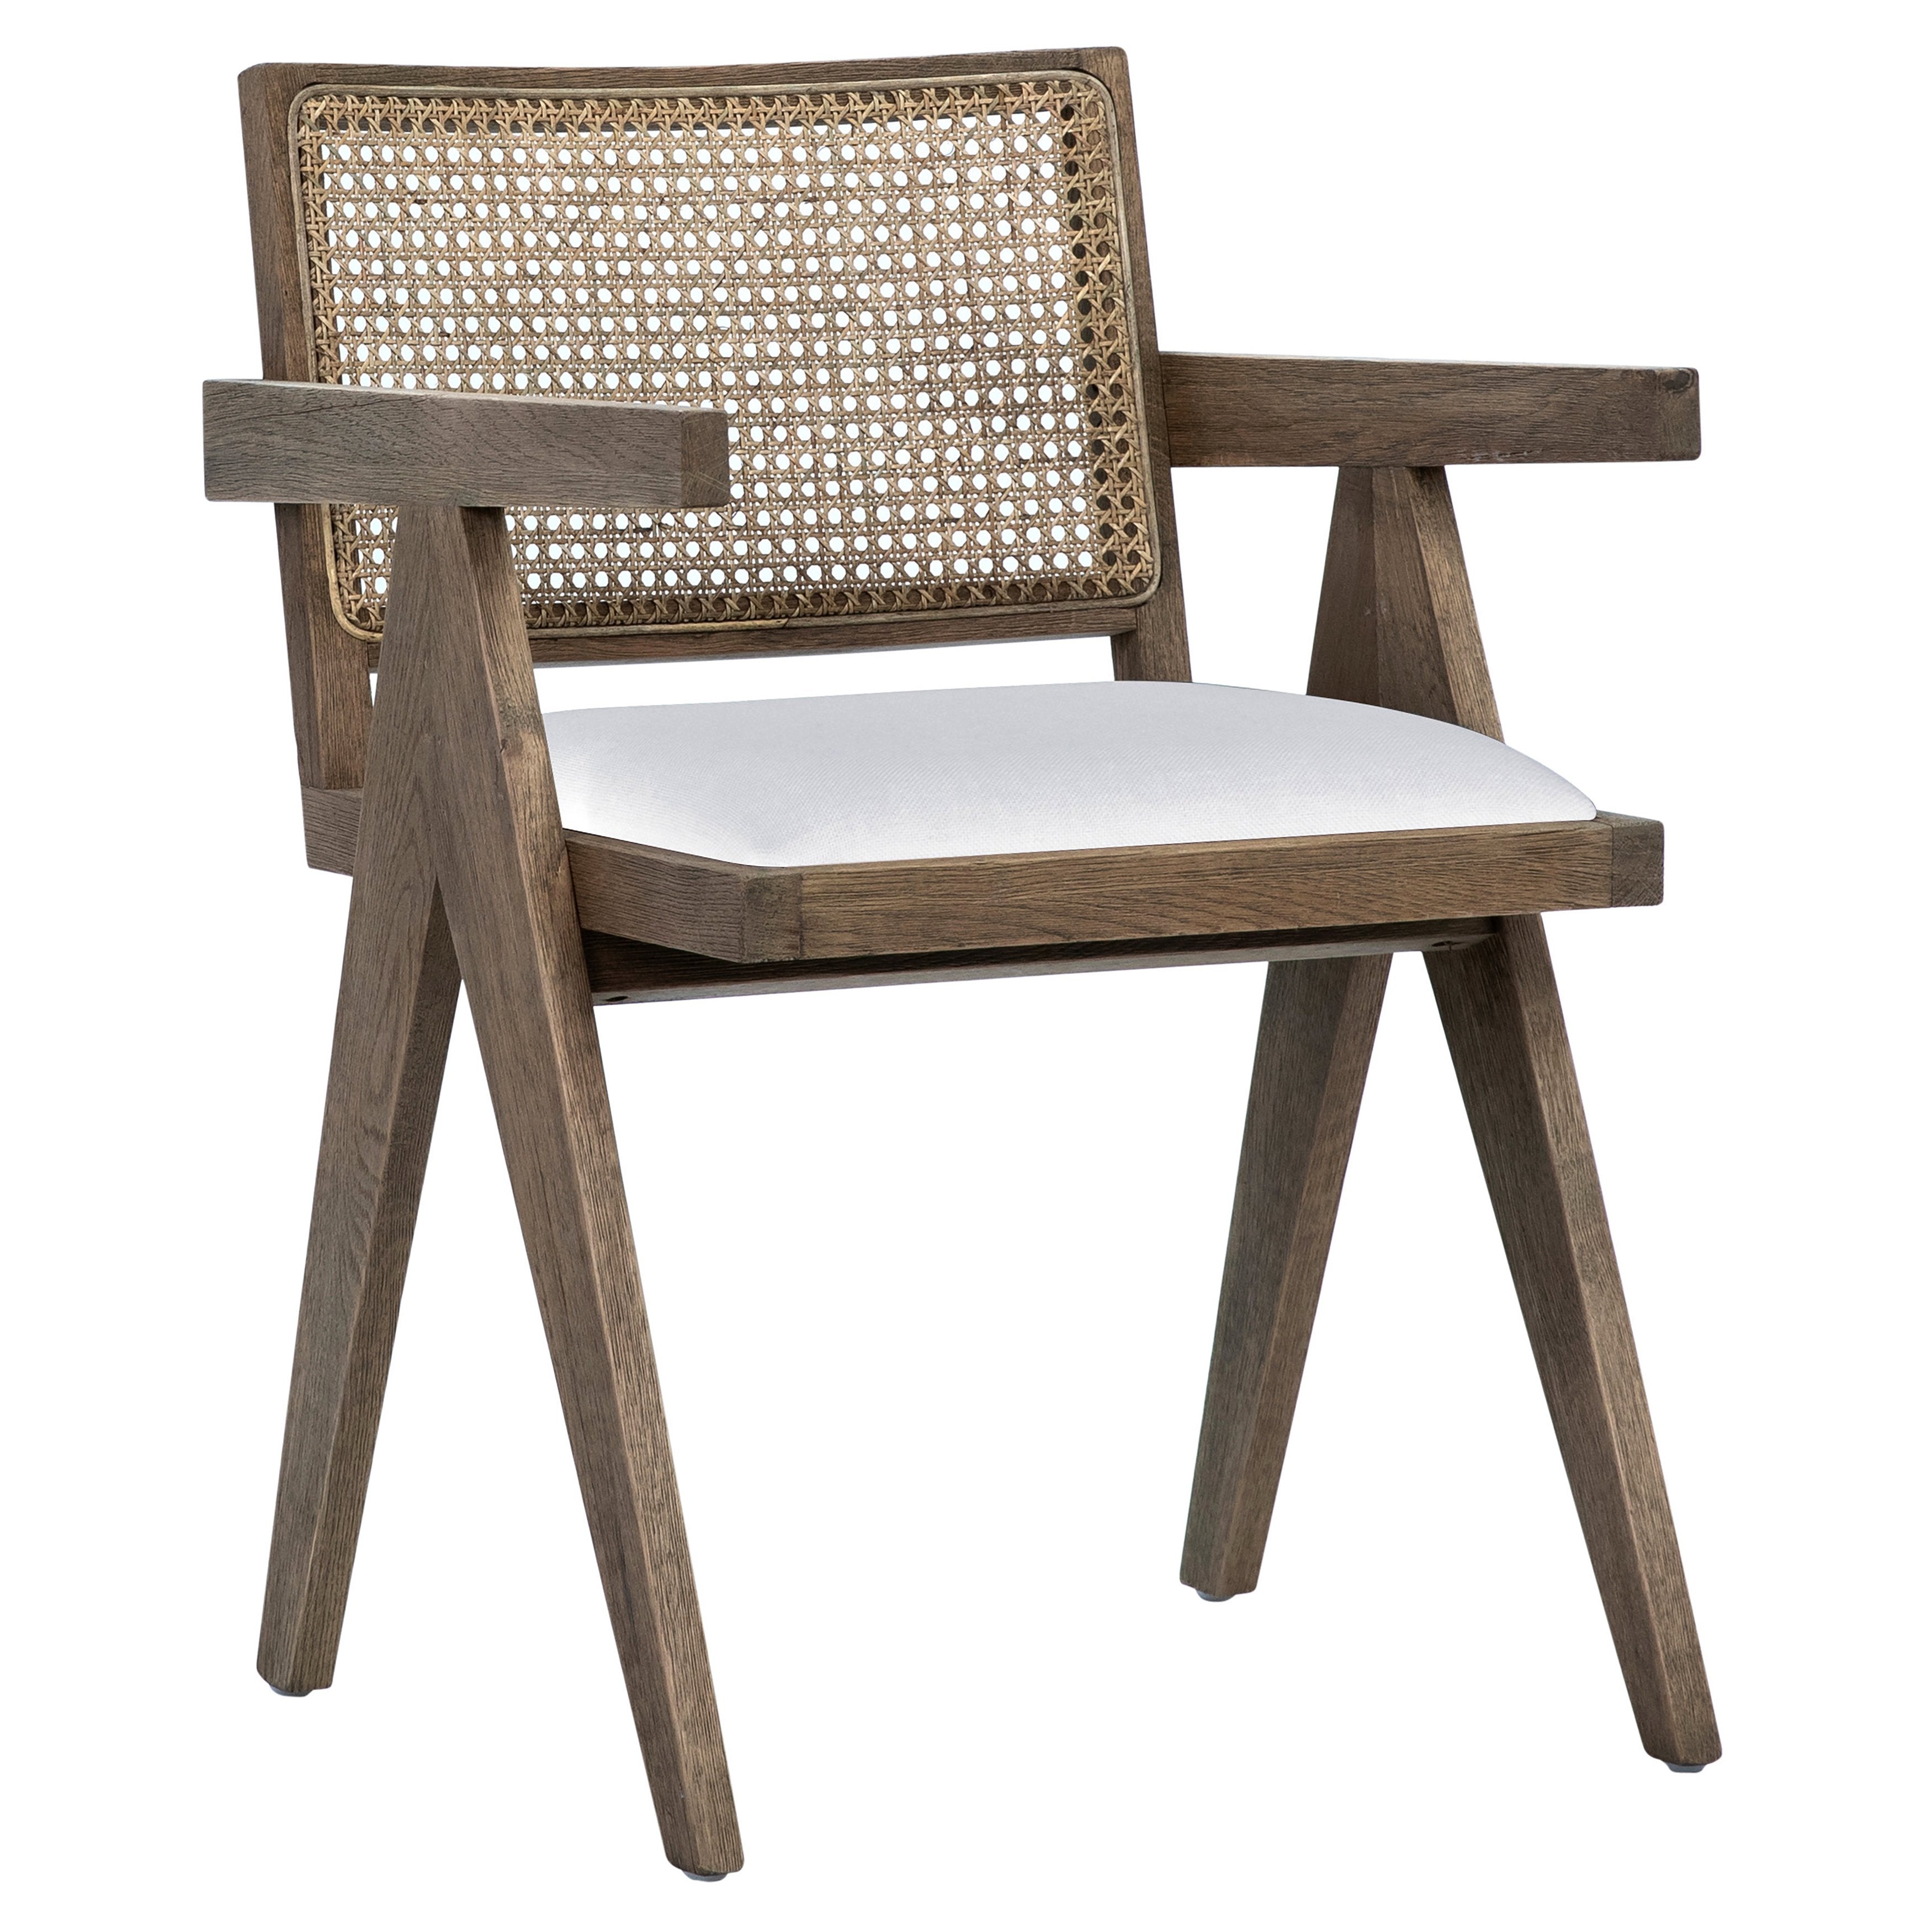 Finished in a grey wash with natural rattan, this beautiful Ocampo dining chair is modern with a tropical flare. The dining chair features a performance linen seat. Amethyst Home provides interior design, new construction, custom furniture, and area rugs in the Kansas City metro area.